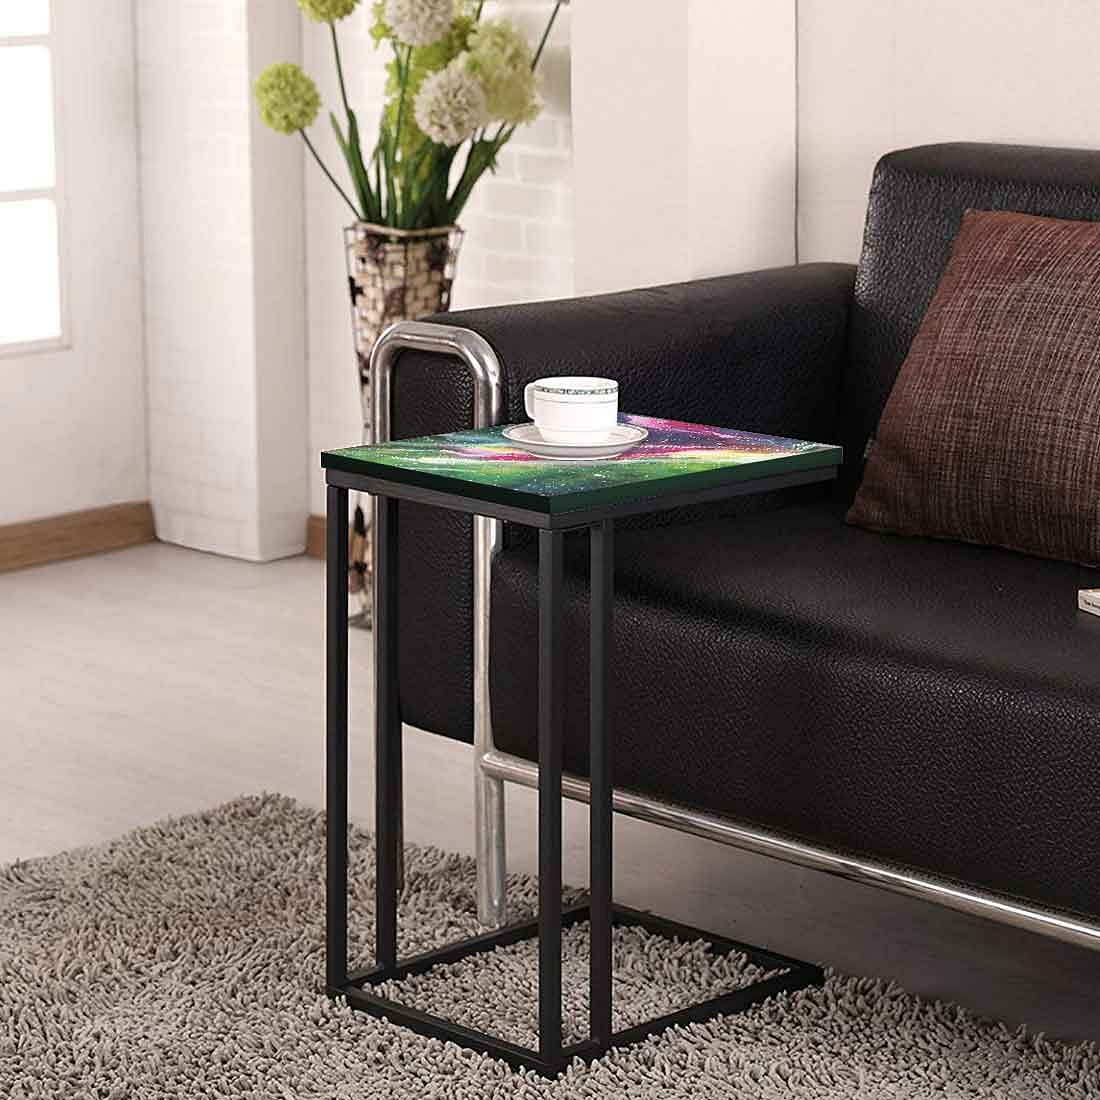 New C Shaped End Table - Space Green Watercolor Nutcase